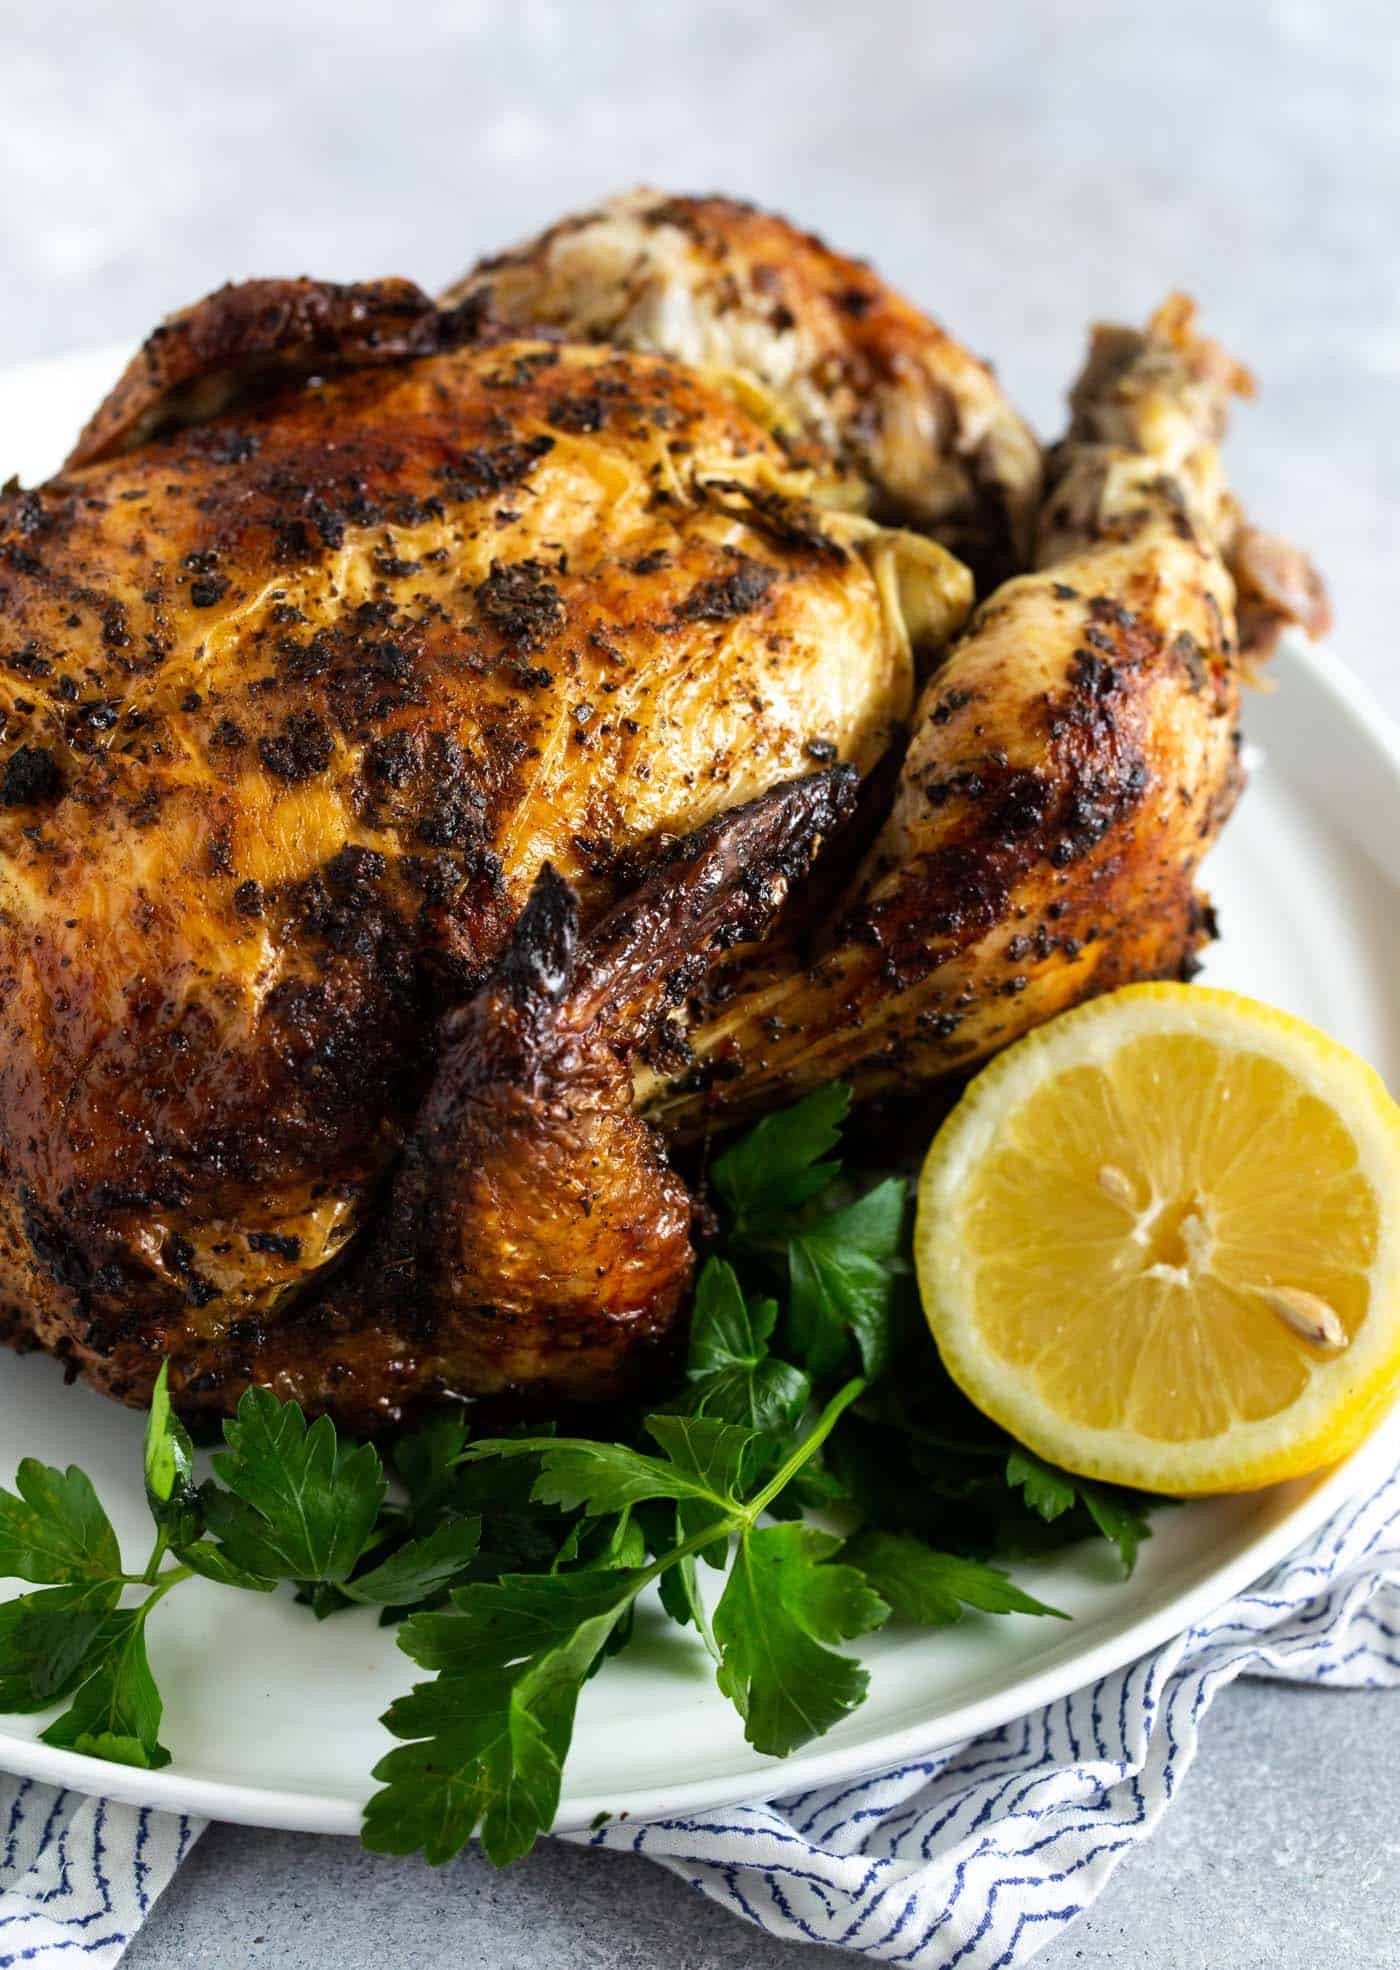 Grilling A Whole Chicken
 How to Grill a Whole Chicken Garnish with Lemon